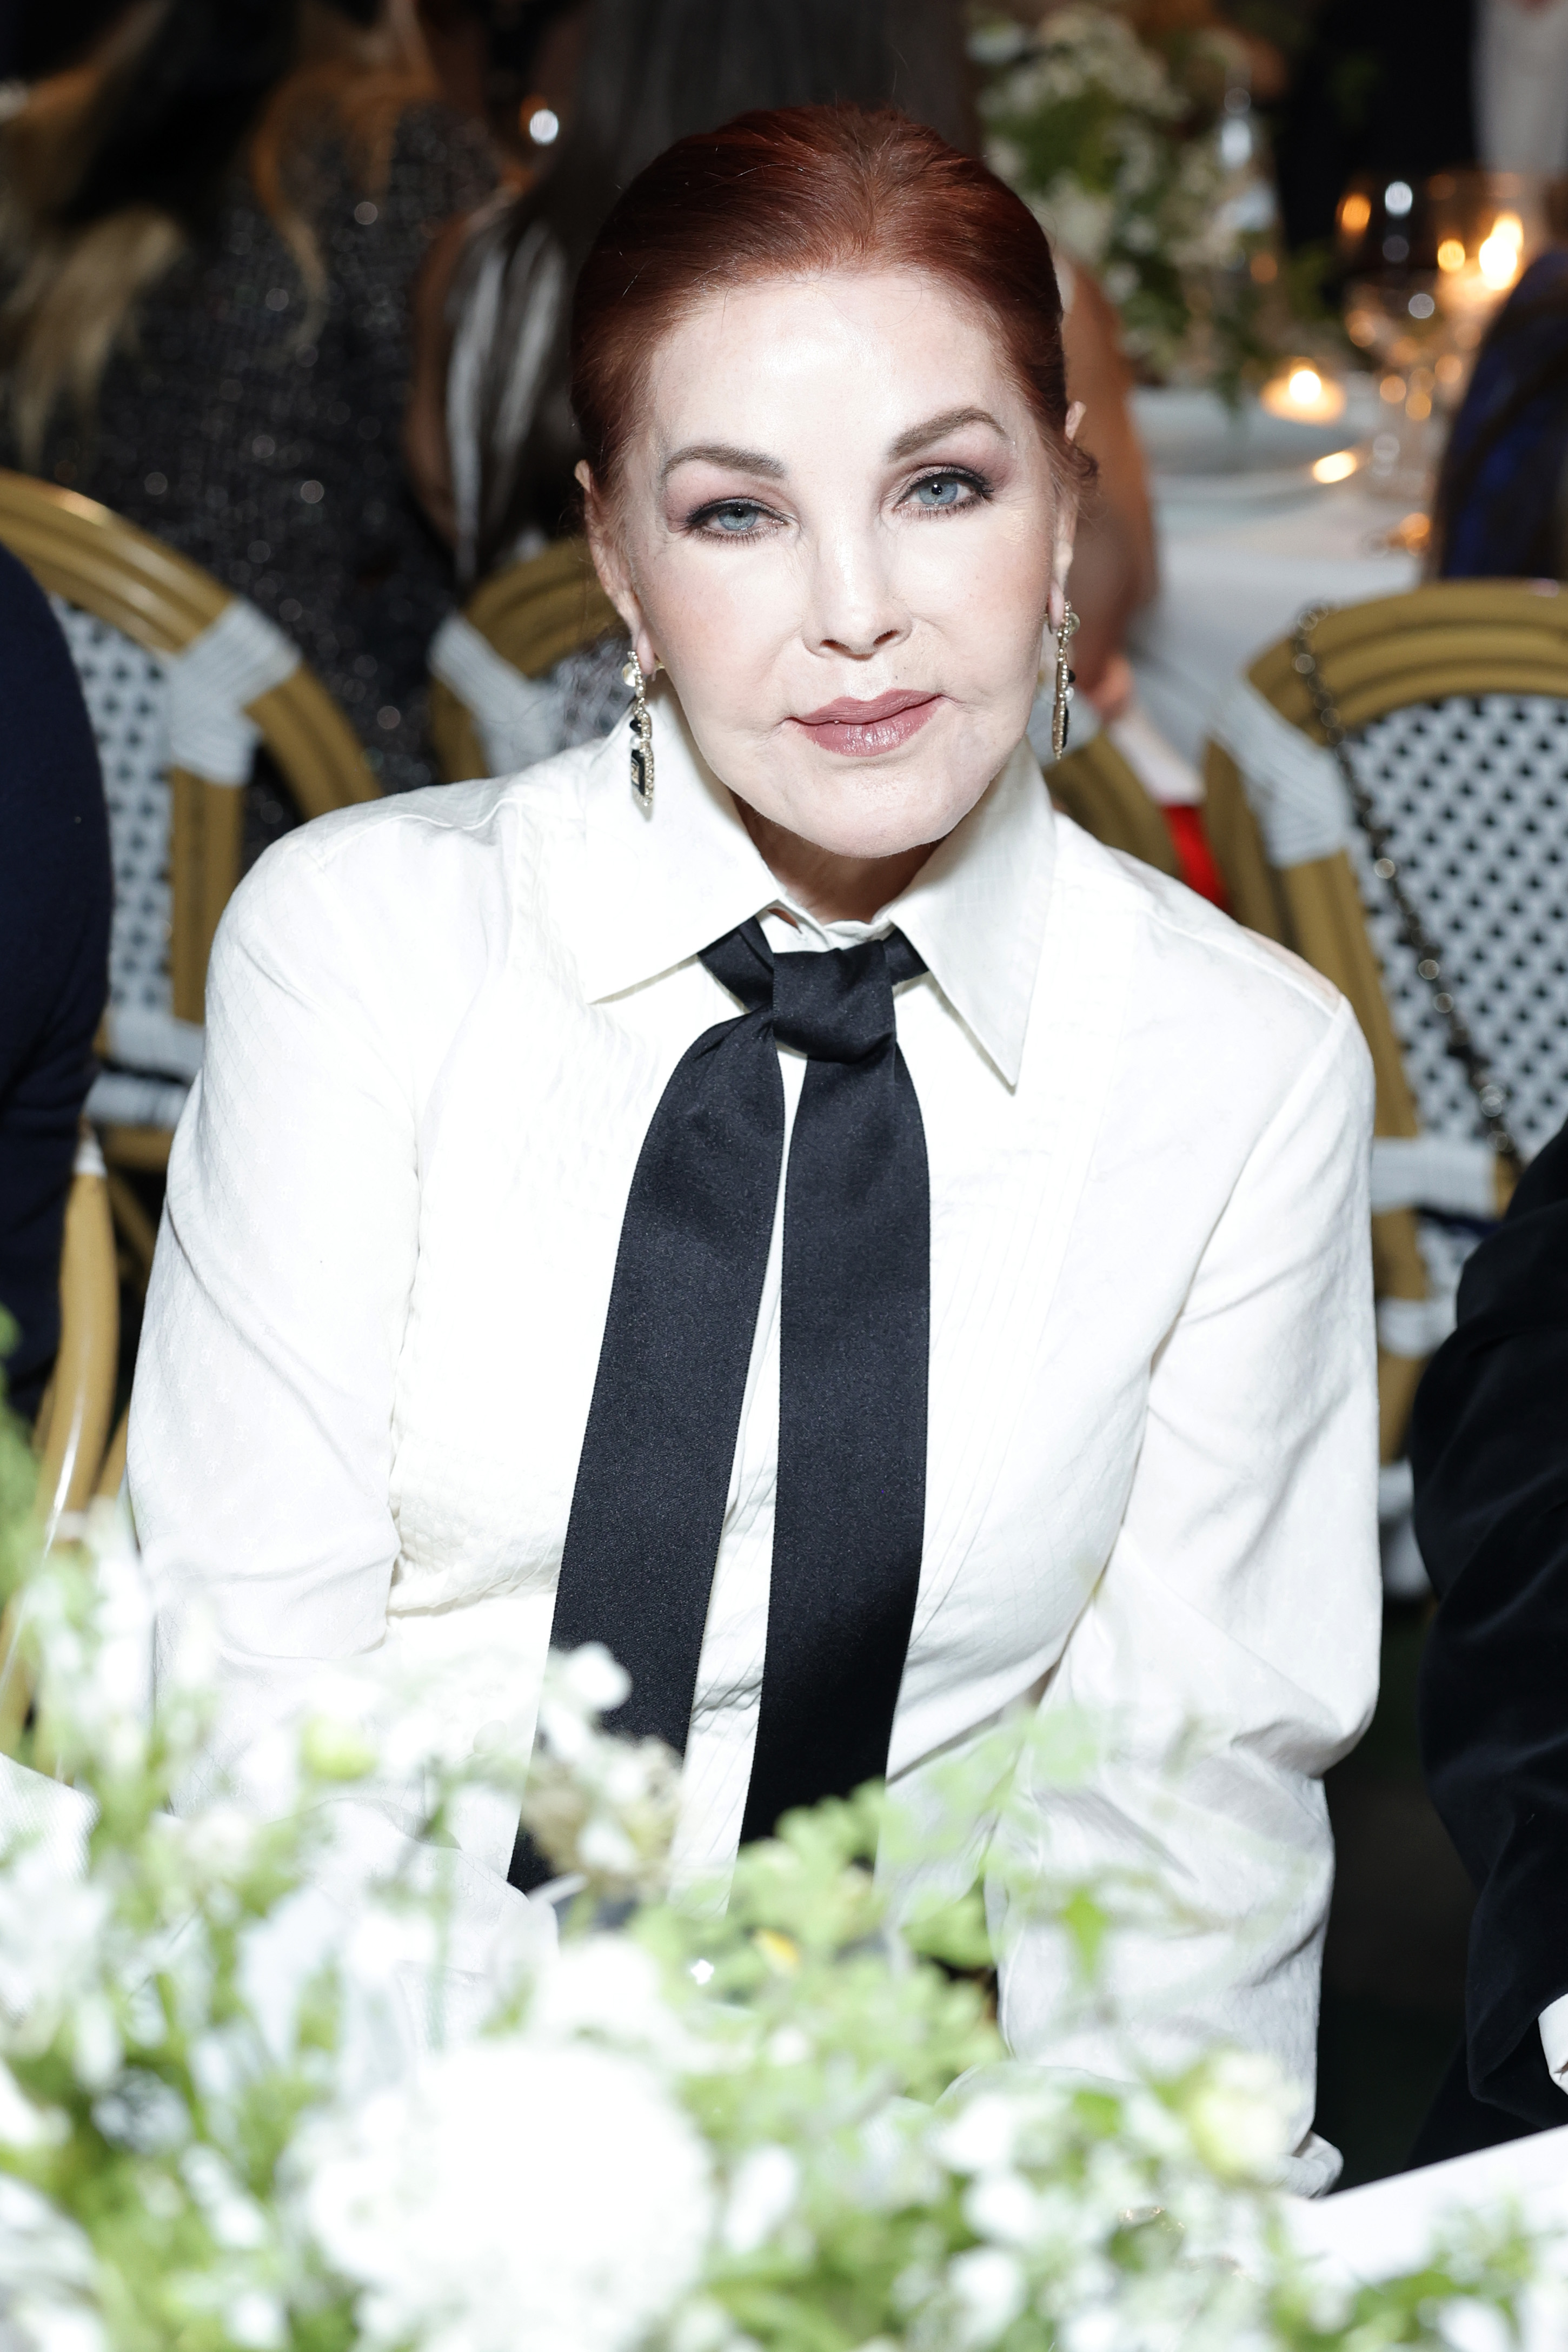 Priscilla Presley at the Chanel dinner in Los Angeles in 2023 | Source: Getty Images